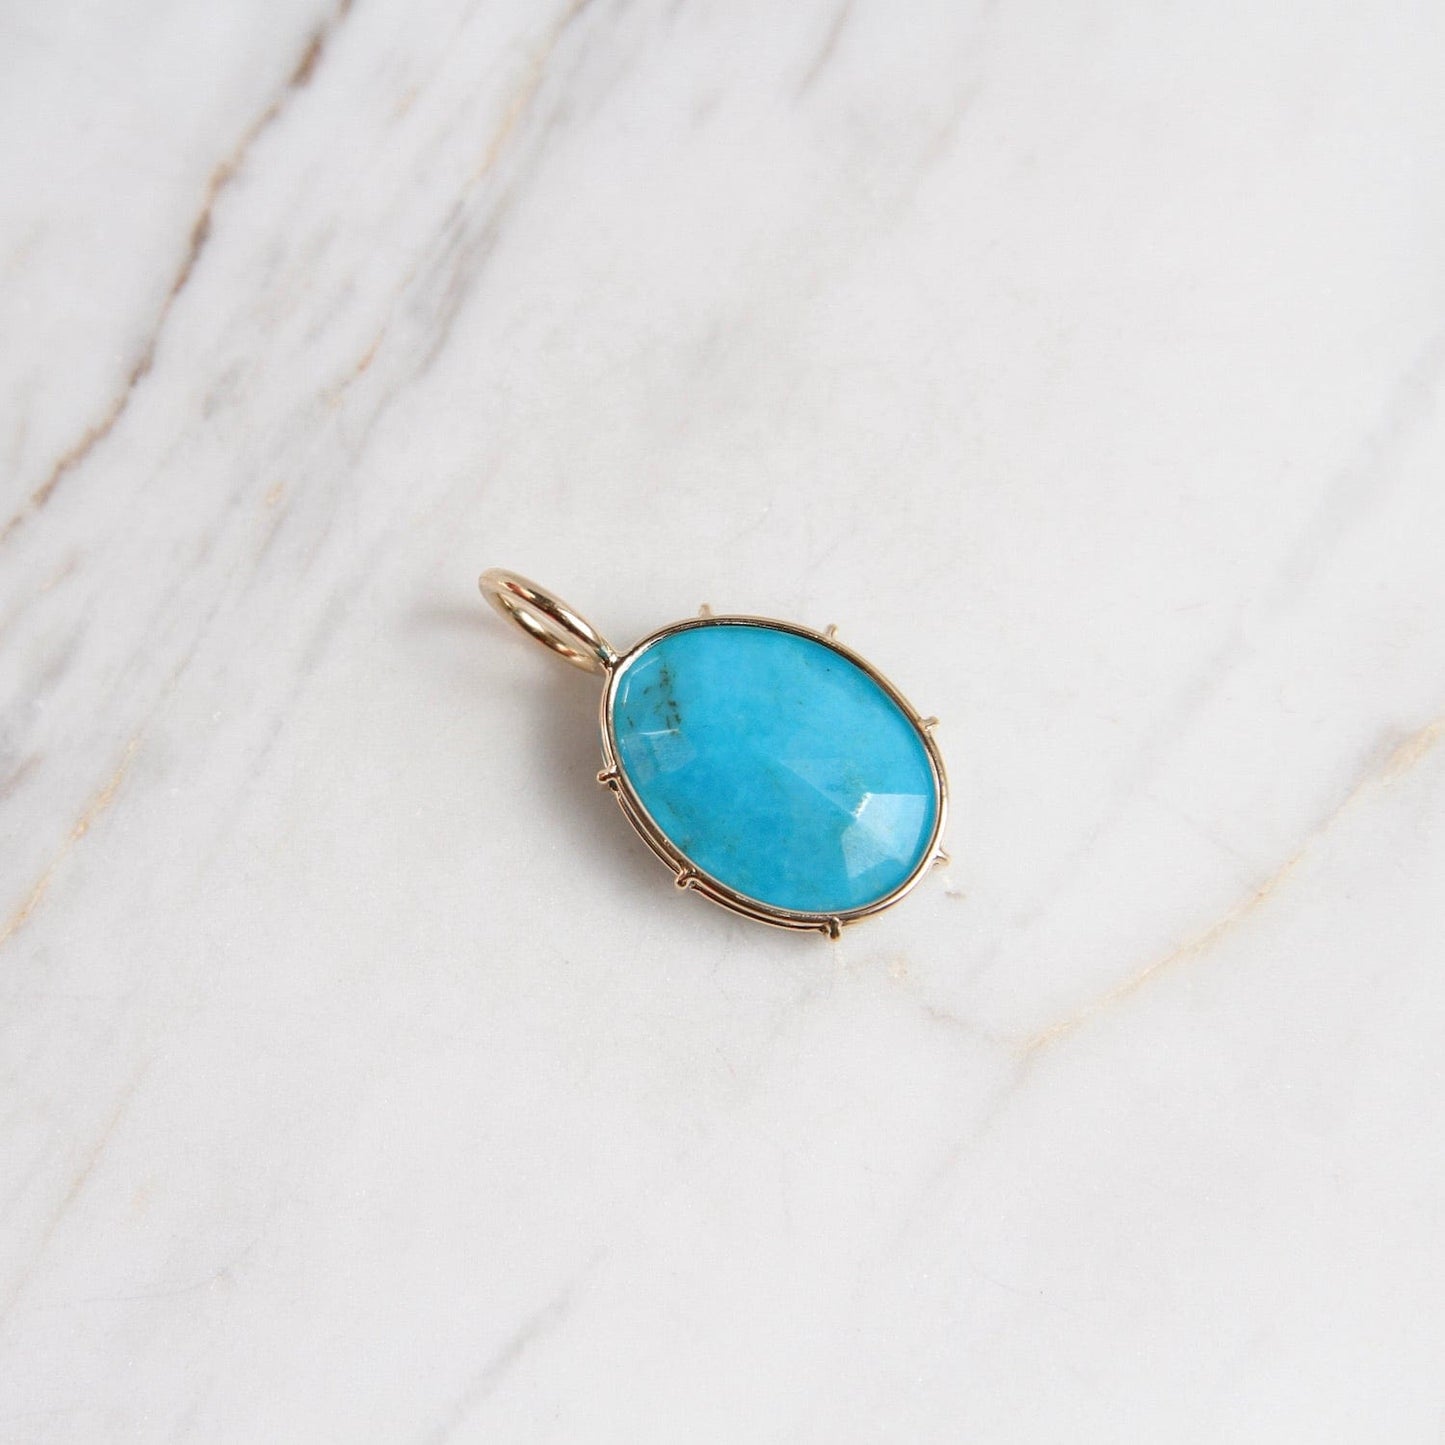 CHM One of a Kind Turquoise Harriet Stone Charm